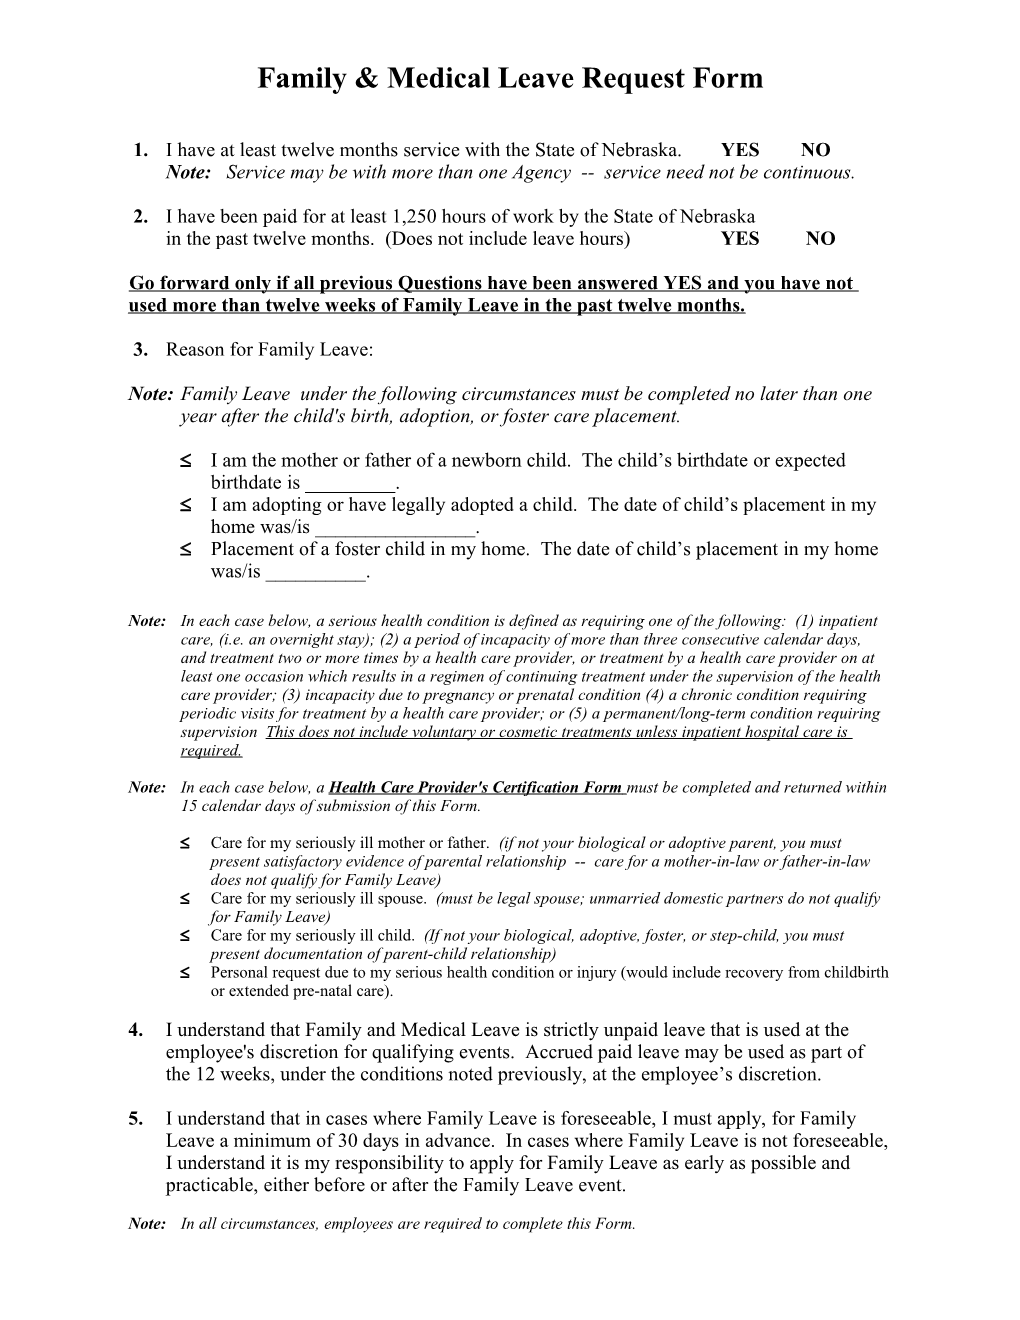 Family & Medical Leave Request Form